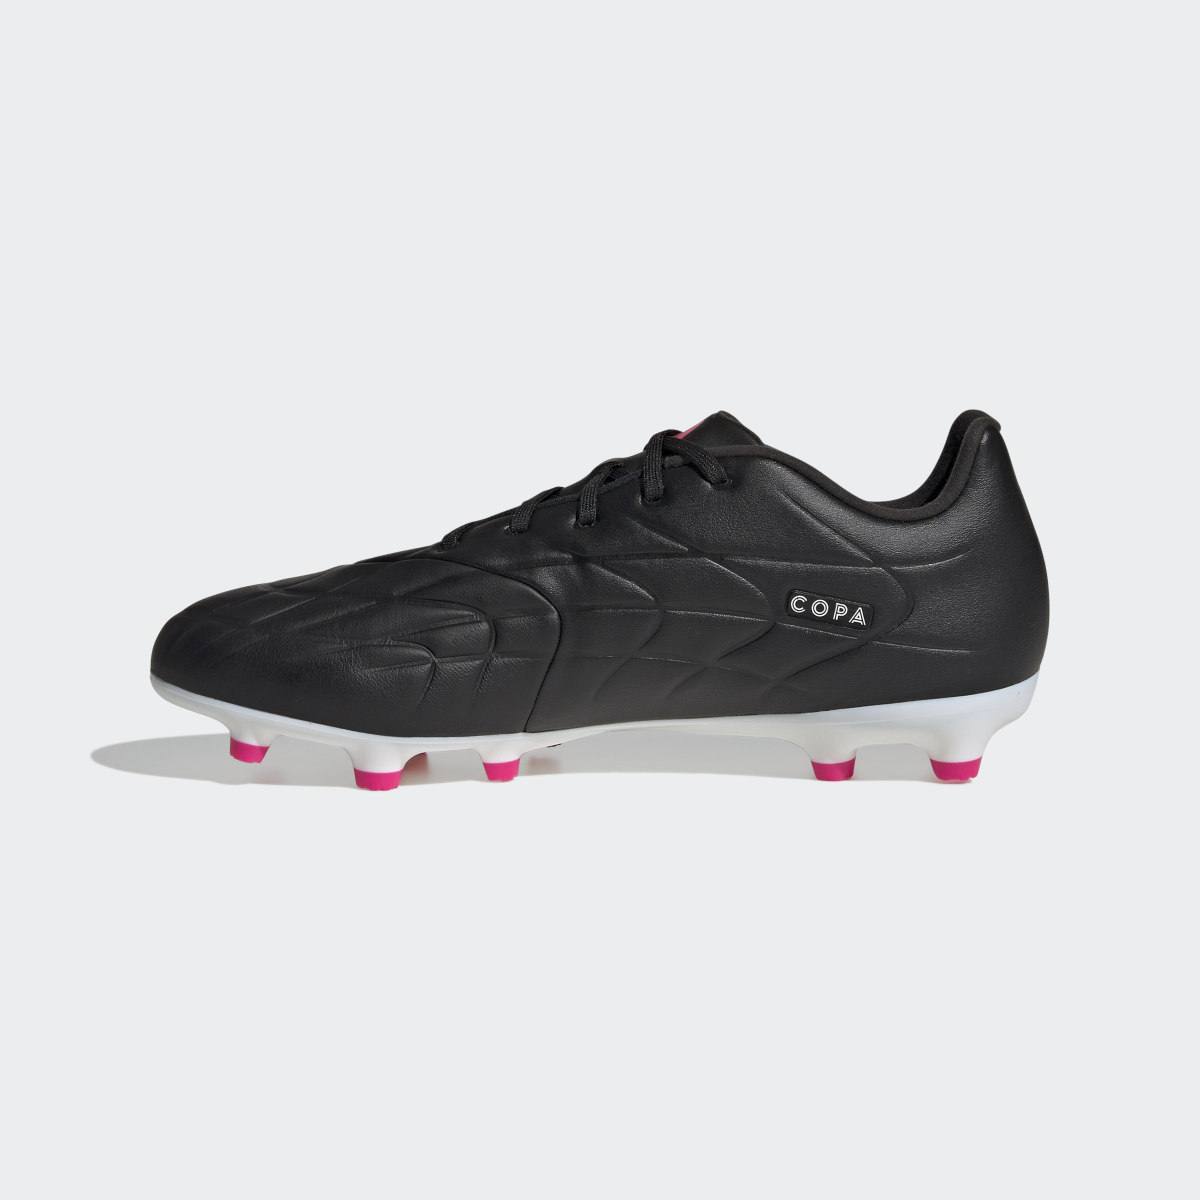 Adidas Copa Pure.3 Firm Ground Boots. 10